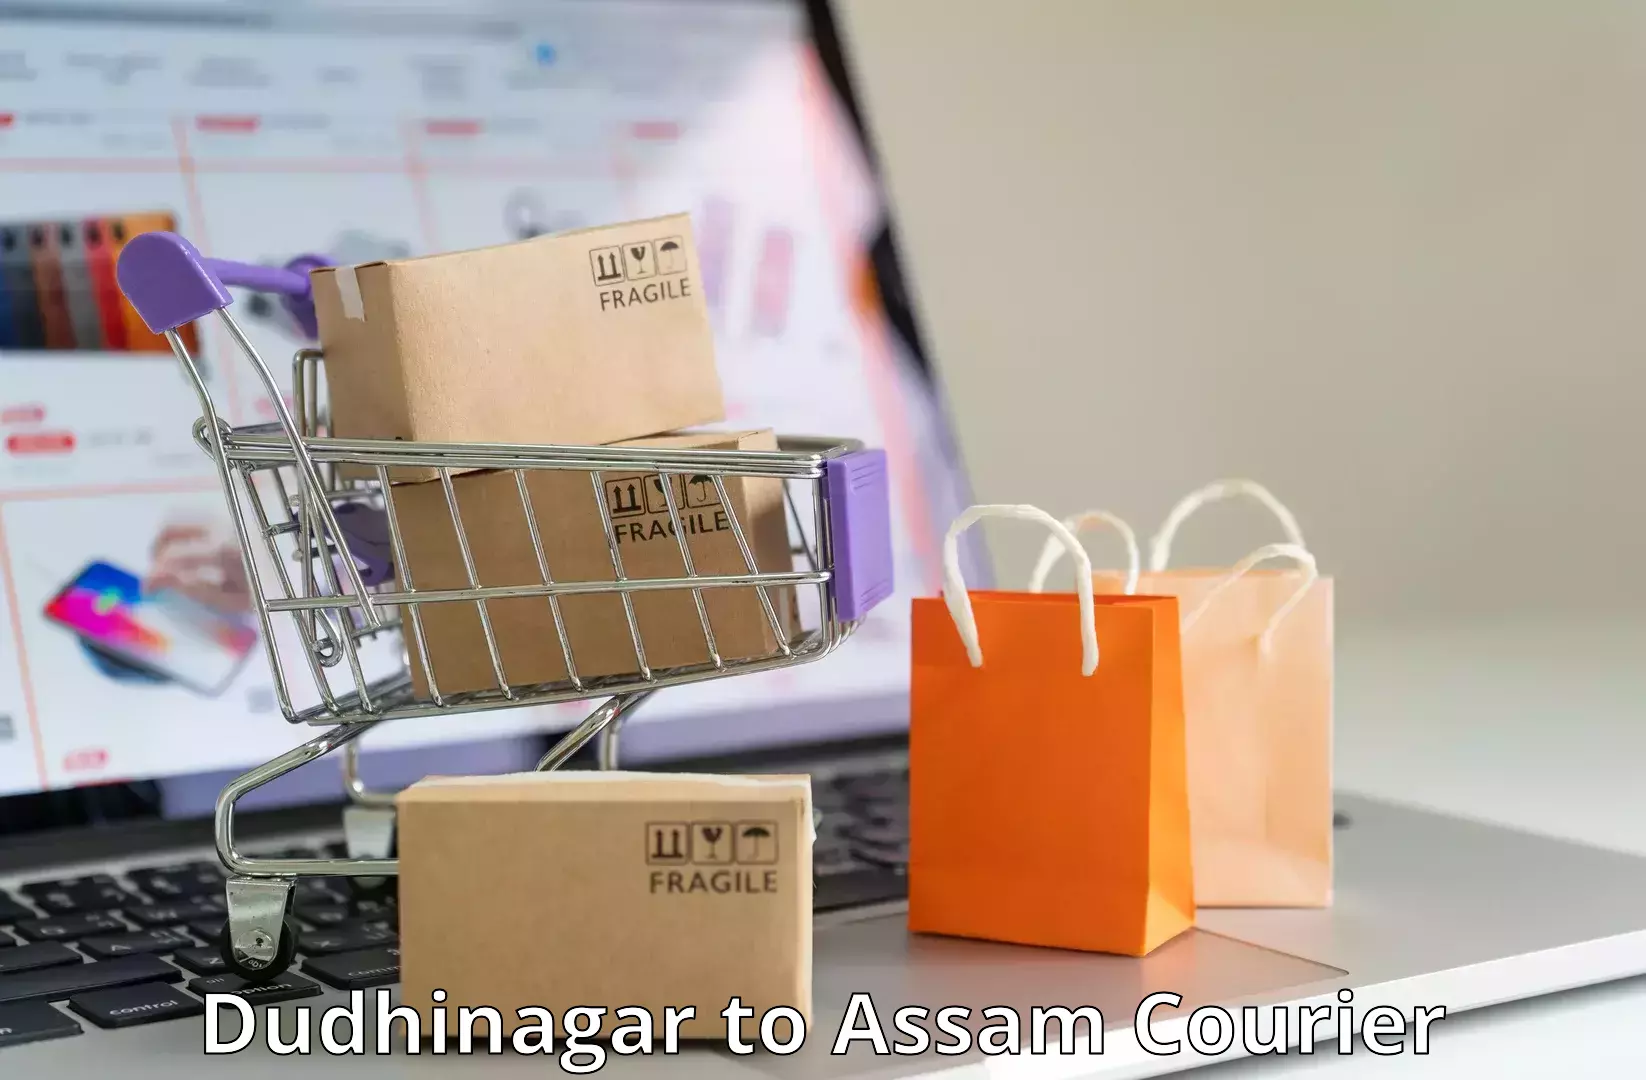 State-of-the-art courier technology Dudhinagar to Kampur